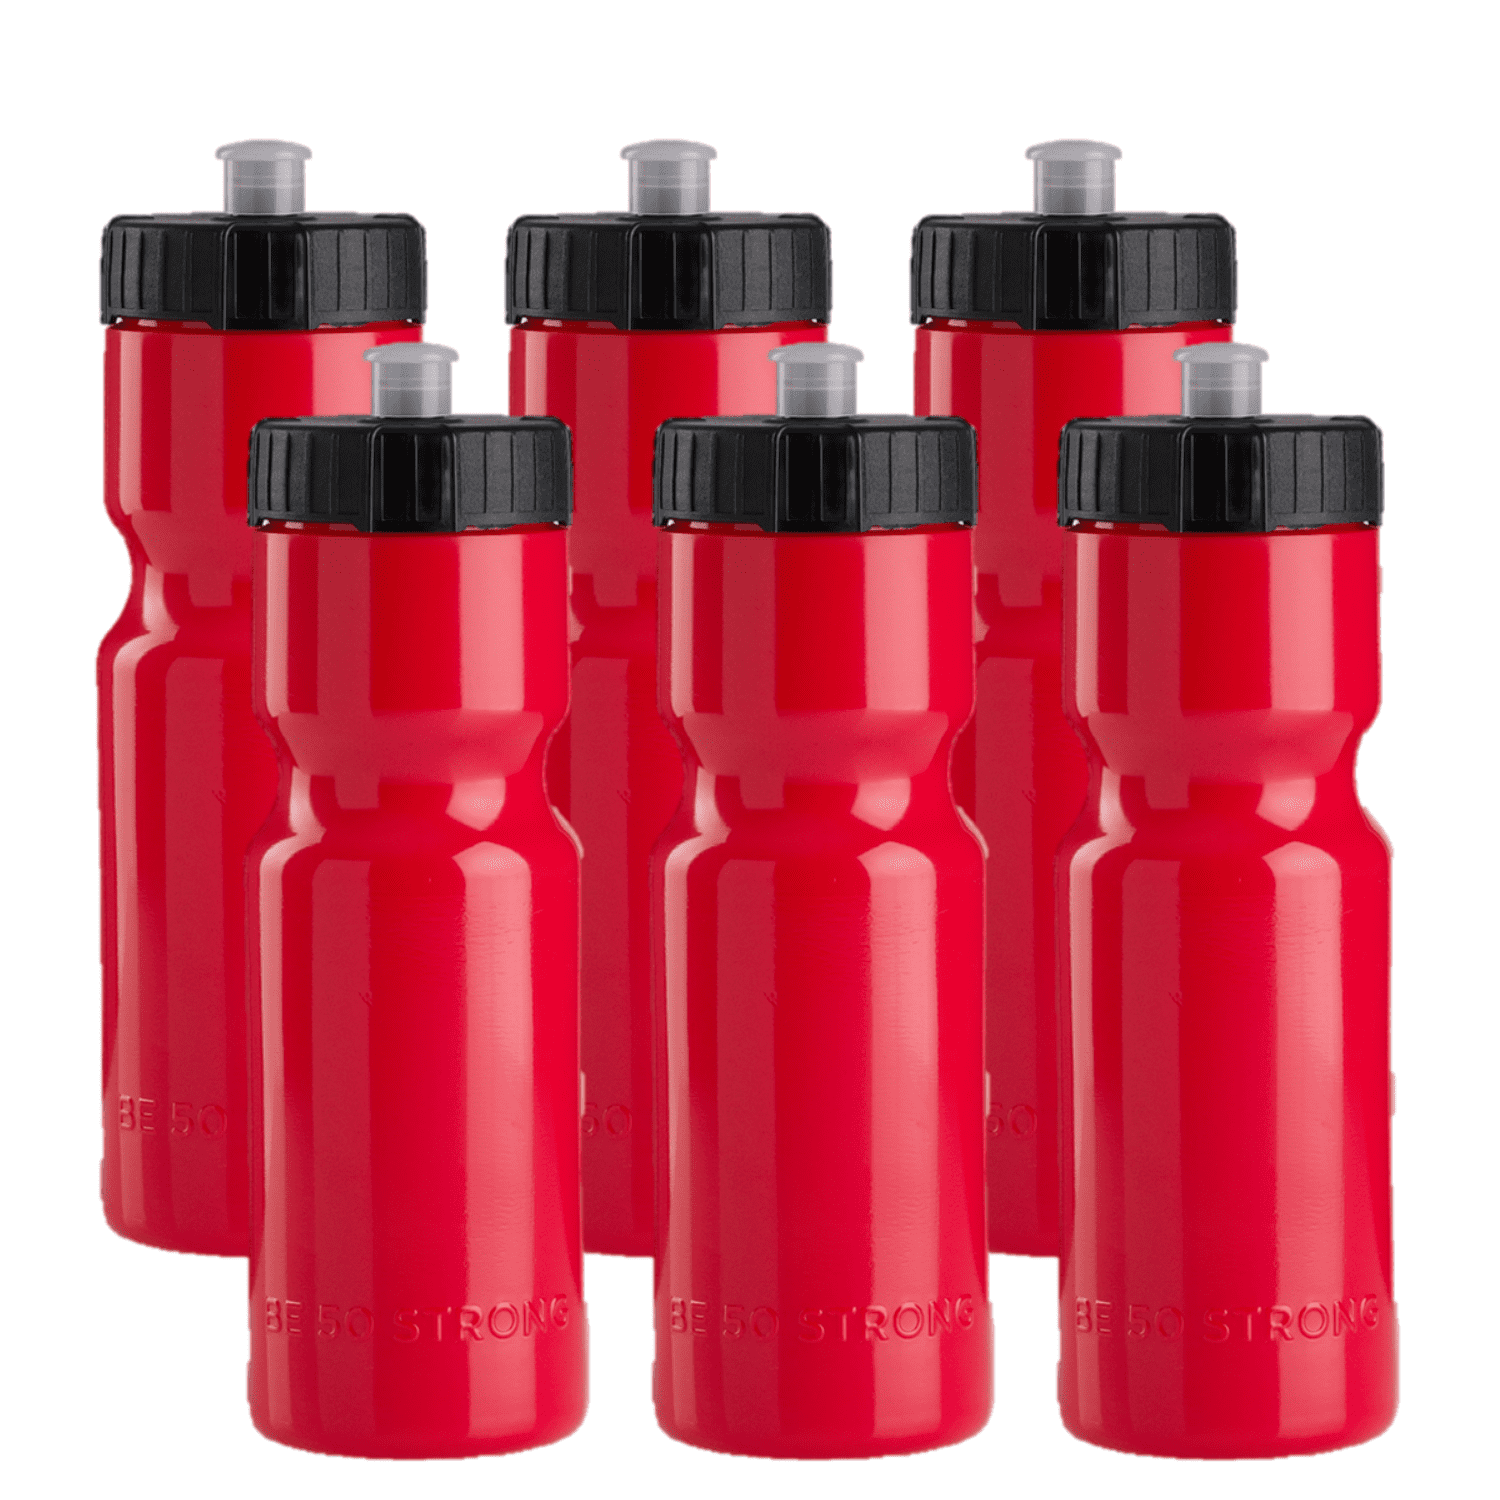 50 Strong Brand Sports Squeeze Water Bottles - Set of 6 - Team Pack – 22  oz. BPA Free Bottle Easy Open Push/Pull Cap – Multiple Colors Available